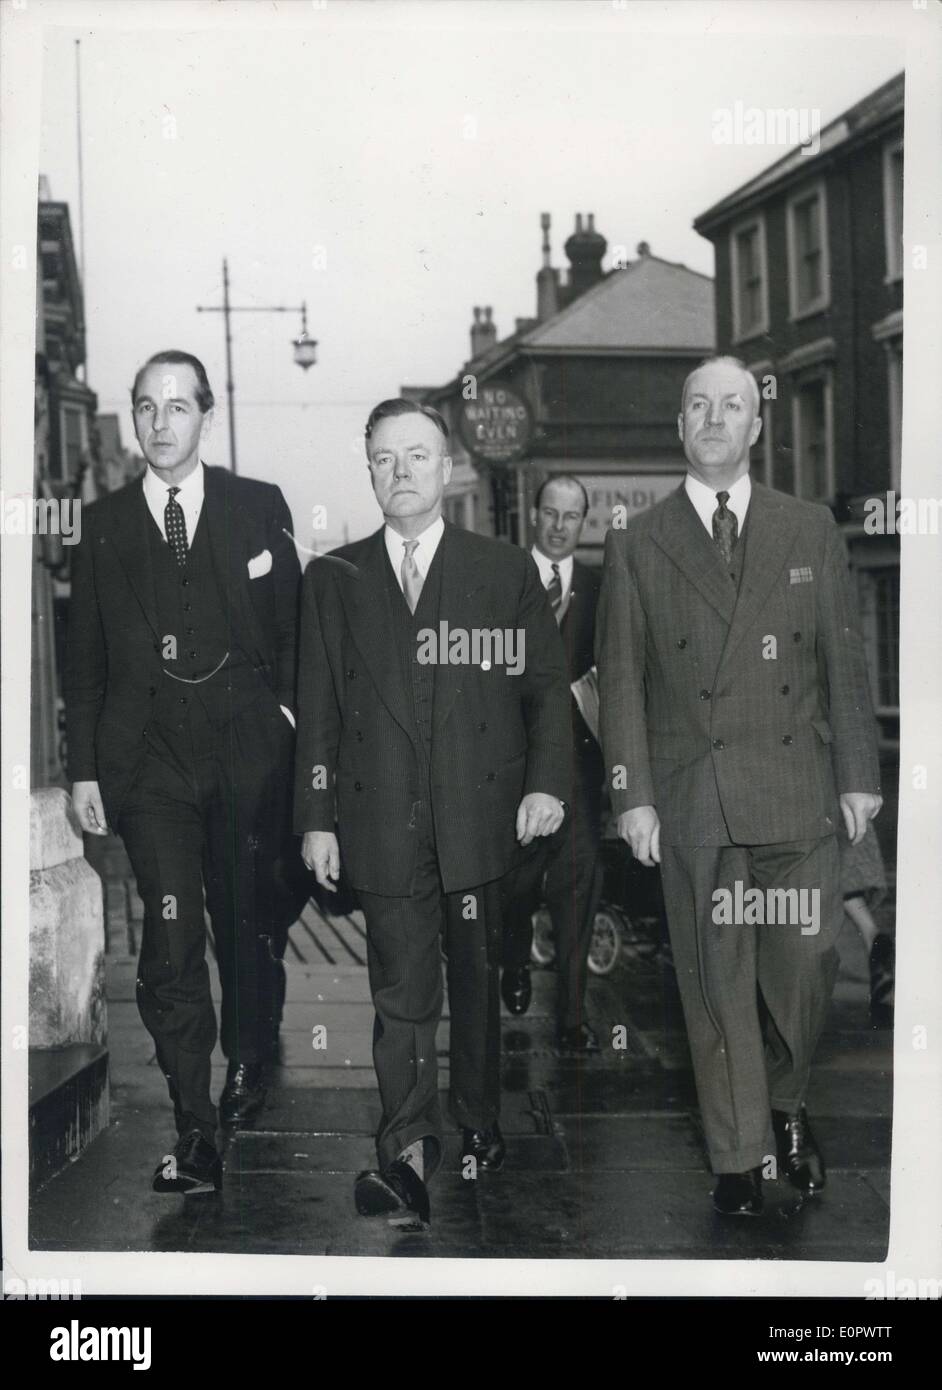 Jan. 14, 1957 - Dr. John Bodkin Adams appears at Eastbourne Prosecution and Det. Hannam. Dr. John Bookin Adams appeared in court at Eastbourne today charge with the murder in November 1950 of Mrs. Edith Alice Morreill (81) a former patient. He also faces 16 other charges. Photo shows Members for the Prosecution - in East bourne this morning. Left to right Mr. M. Morris, Mr. M. Stevenson Q.C. - and Det. Supt. Hannan - who investigated the Eastbourng happenings which ended in the arrest of Dr. Adams. Stock Photo